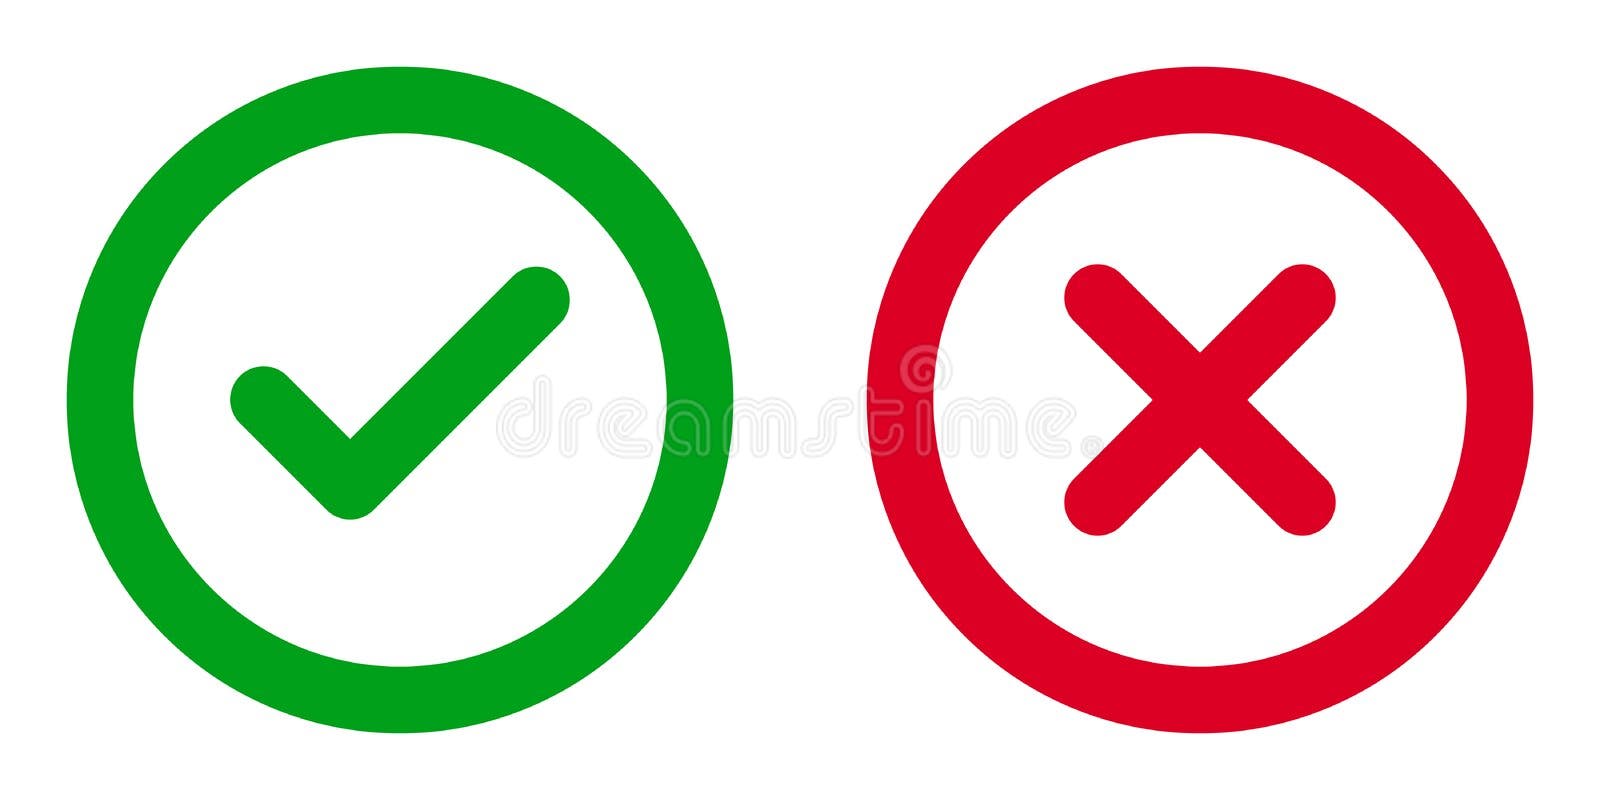 Звук правильно неправильно. Rejected icon. Approve or reject.